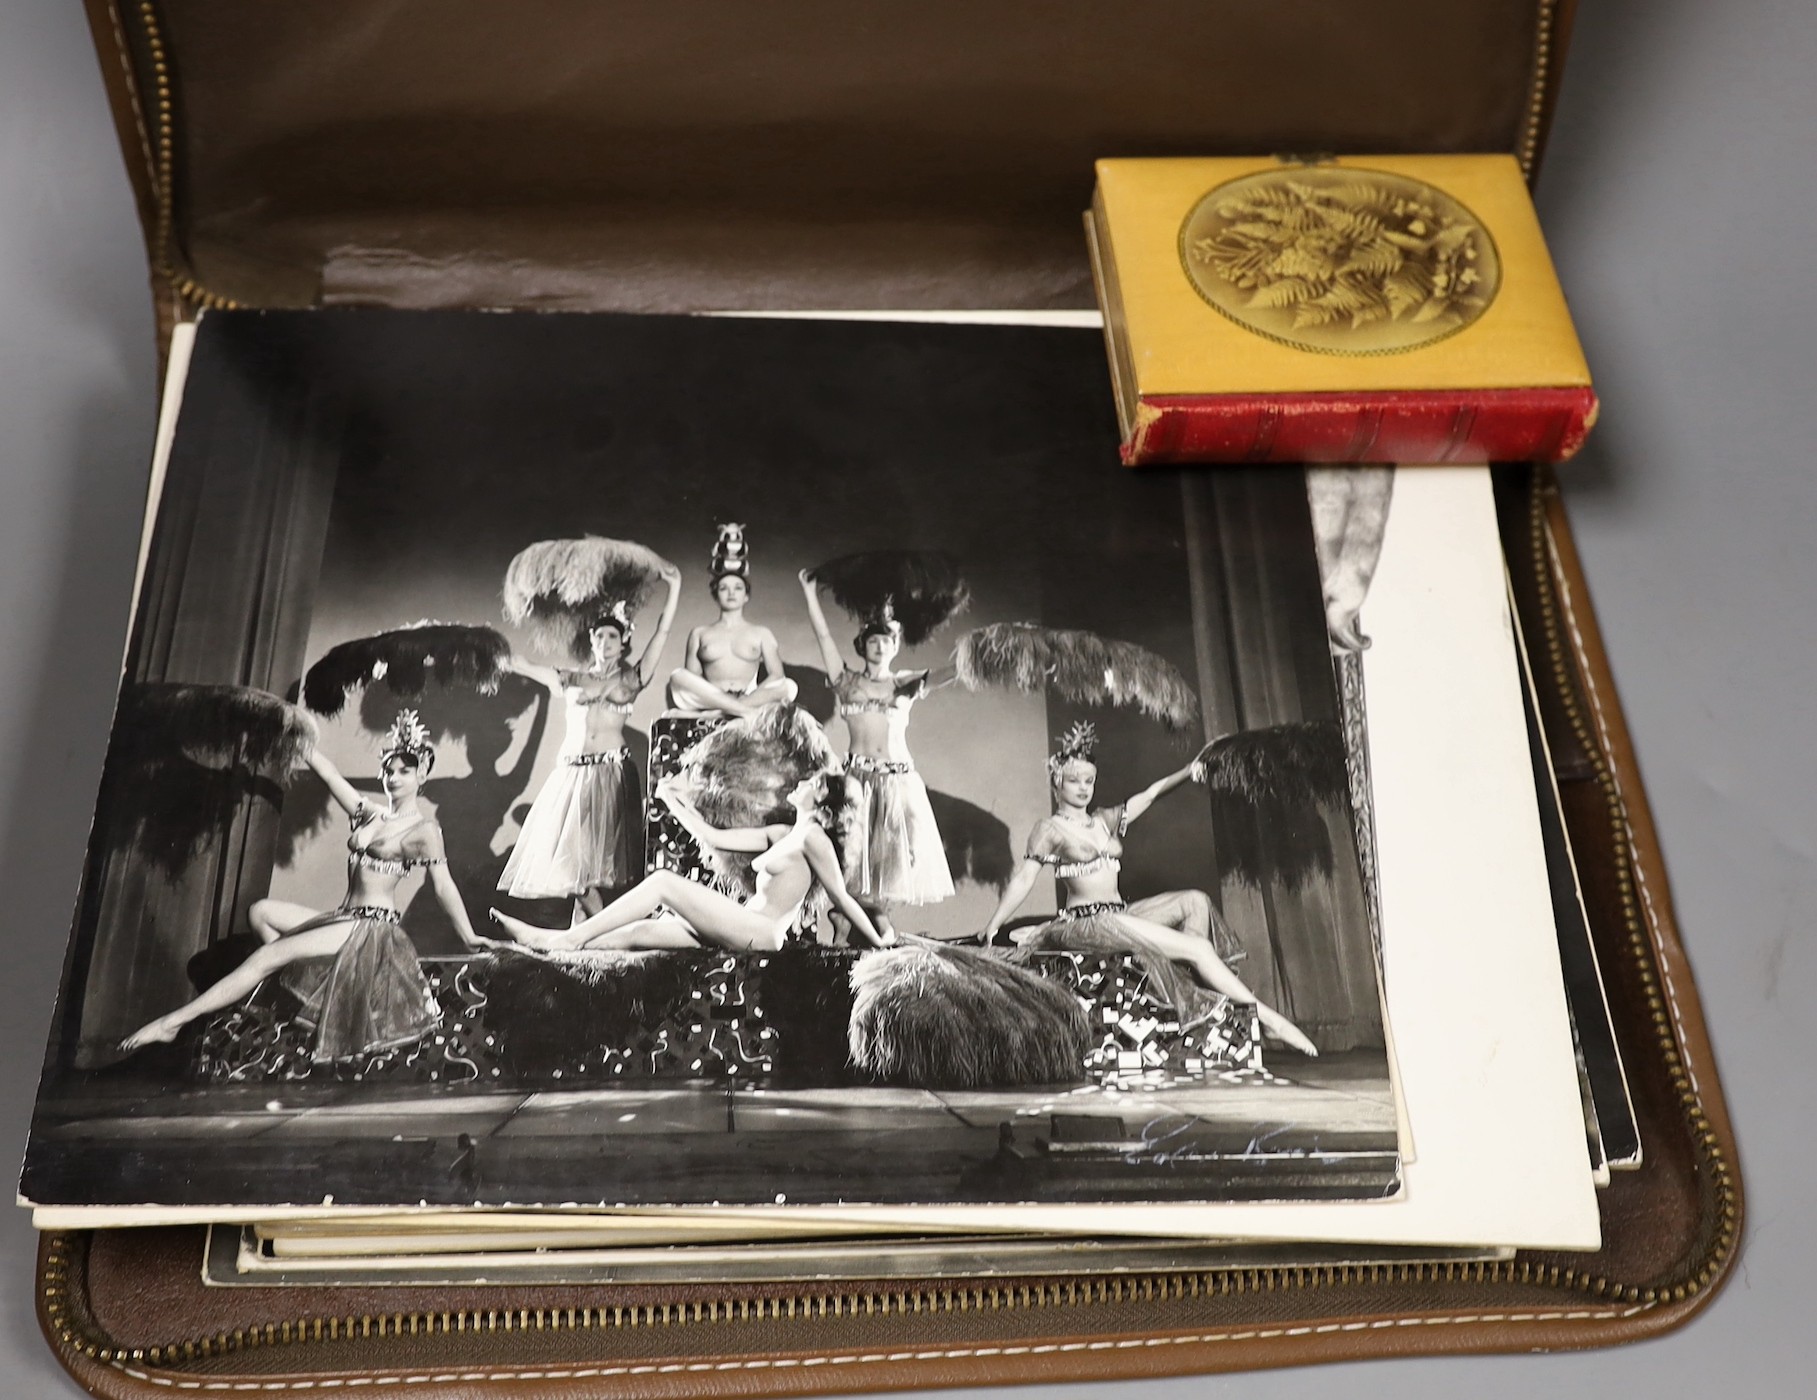 A collection of black and white 1960’s photos from the Windmill Theatre, London, some signed by the photographer together with a Mauchline ware album containing photos of Sussex